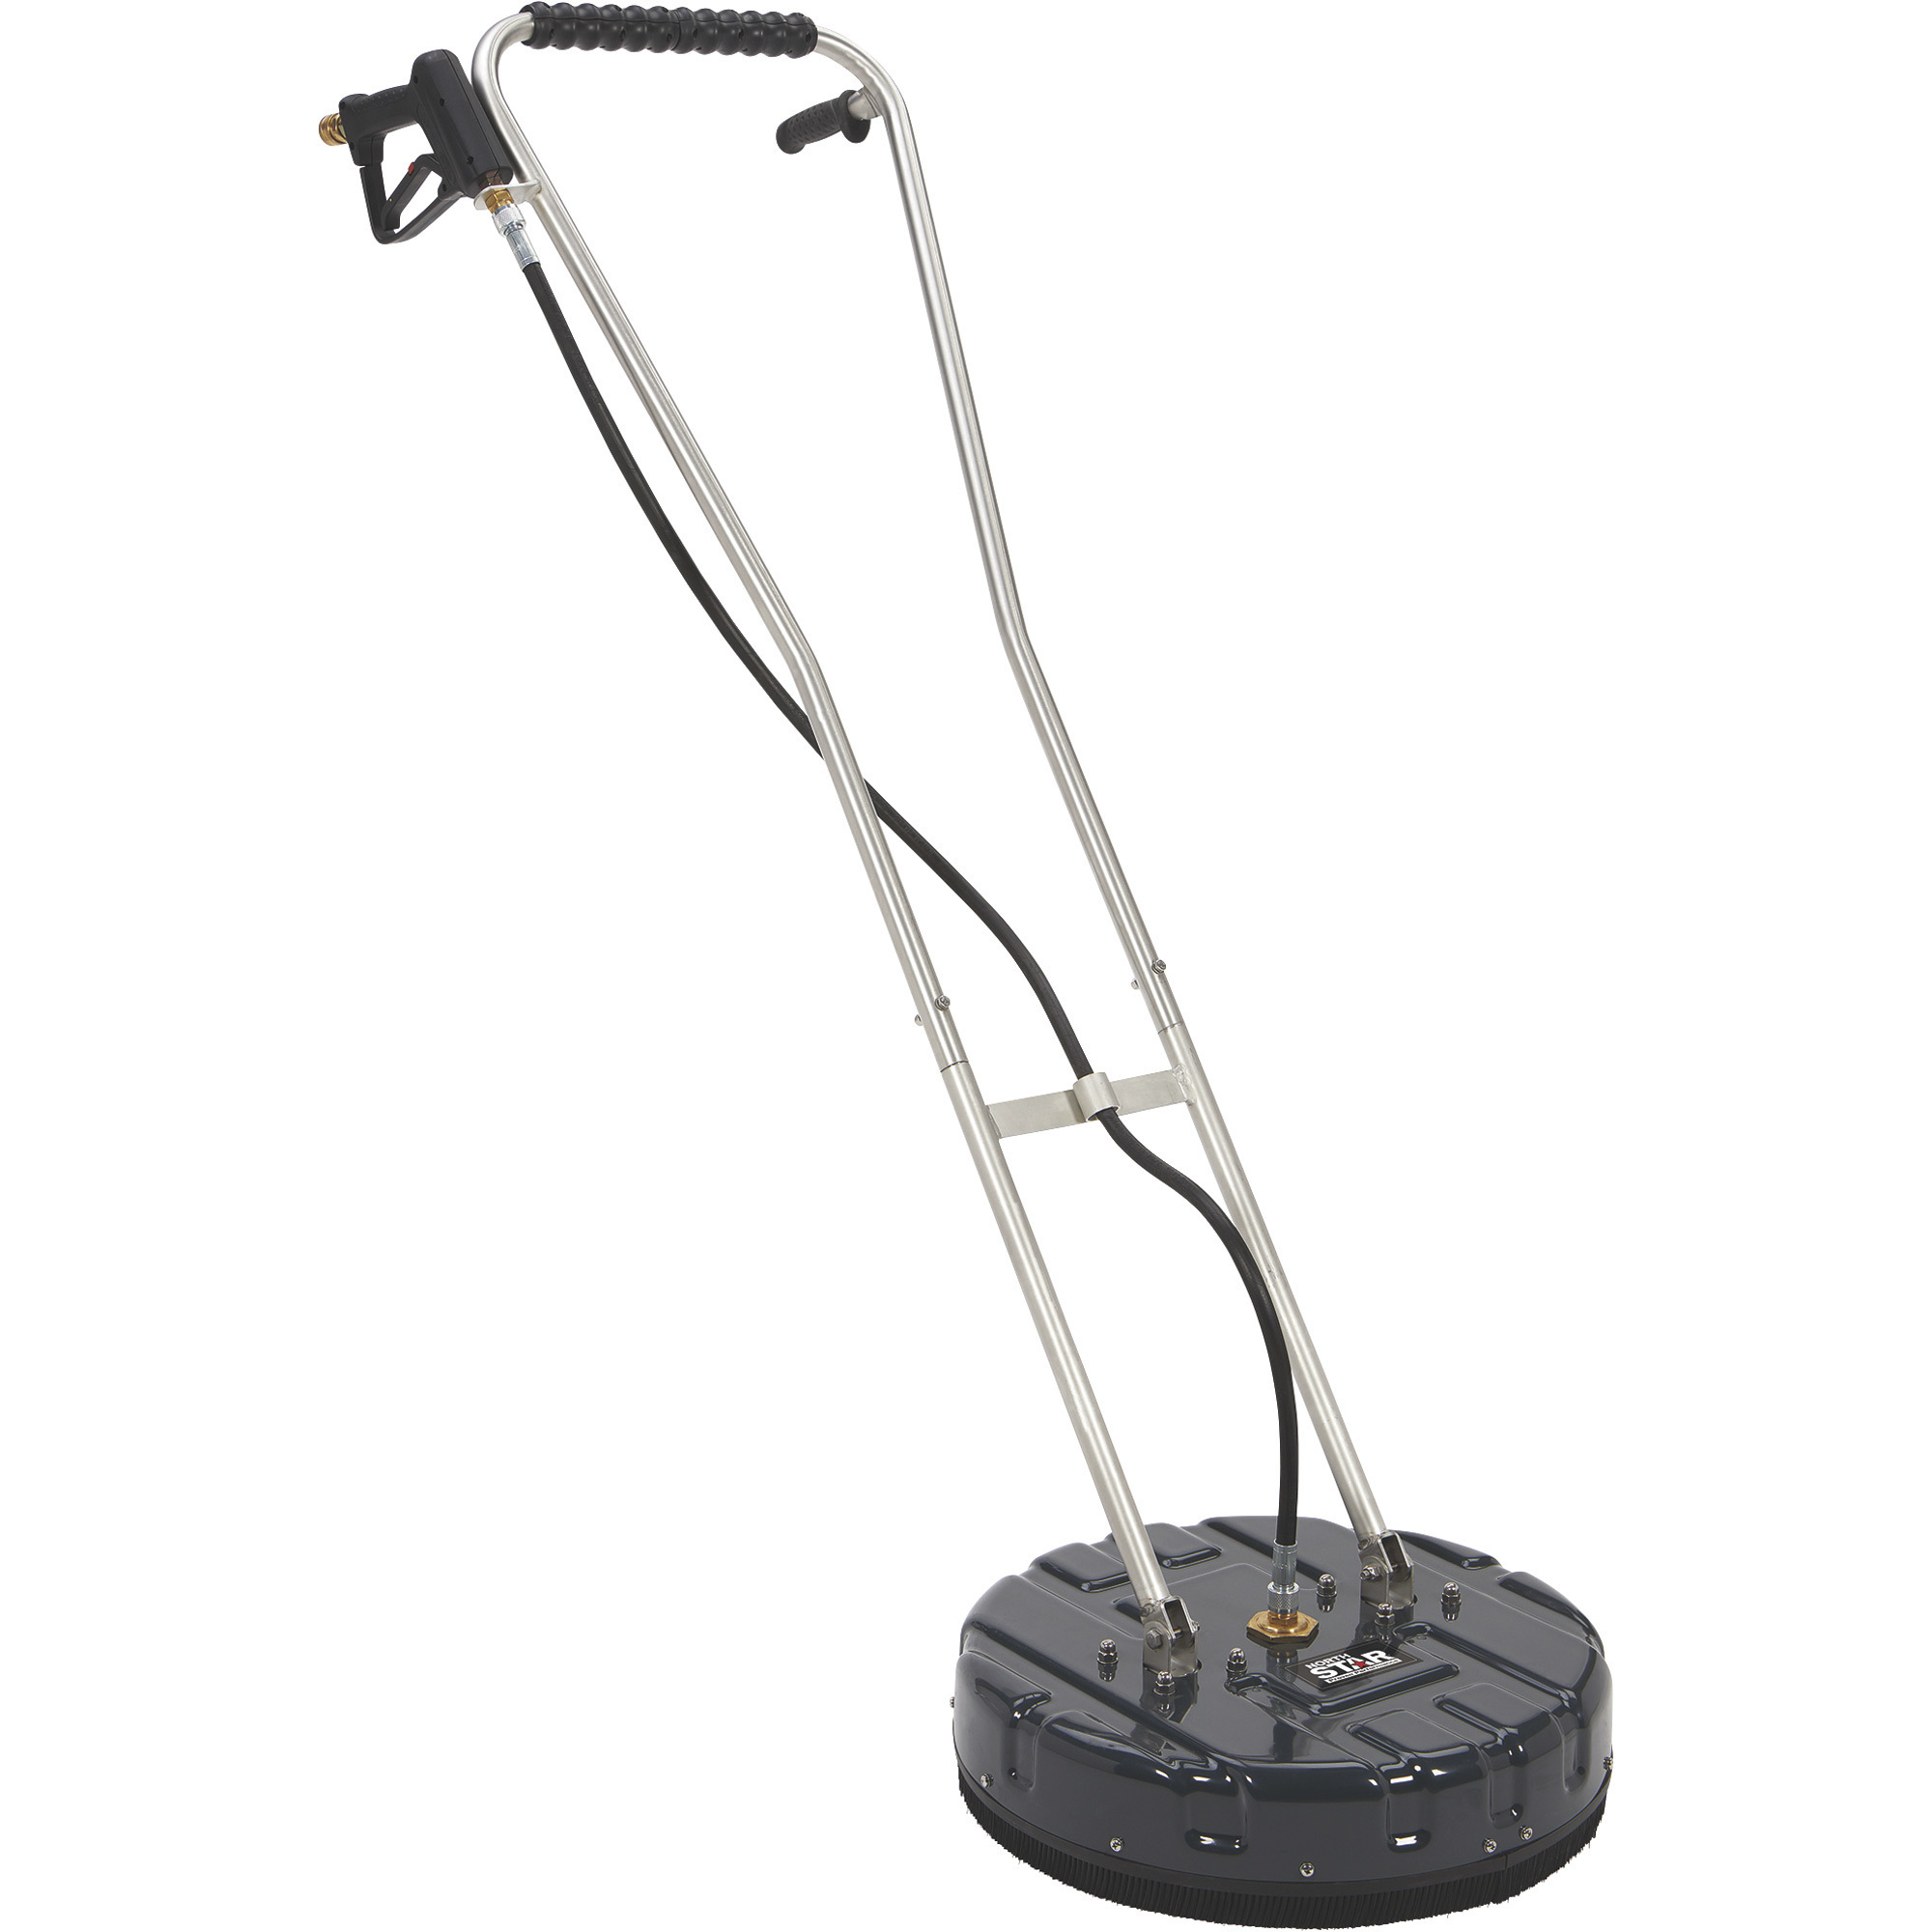 NorthStar Pressure Washer Surface Cleaner, 20Inch, 5000 PSI, 8.0 GPM, Stainless Steel, Model #105834